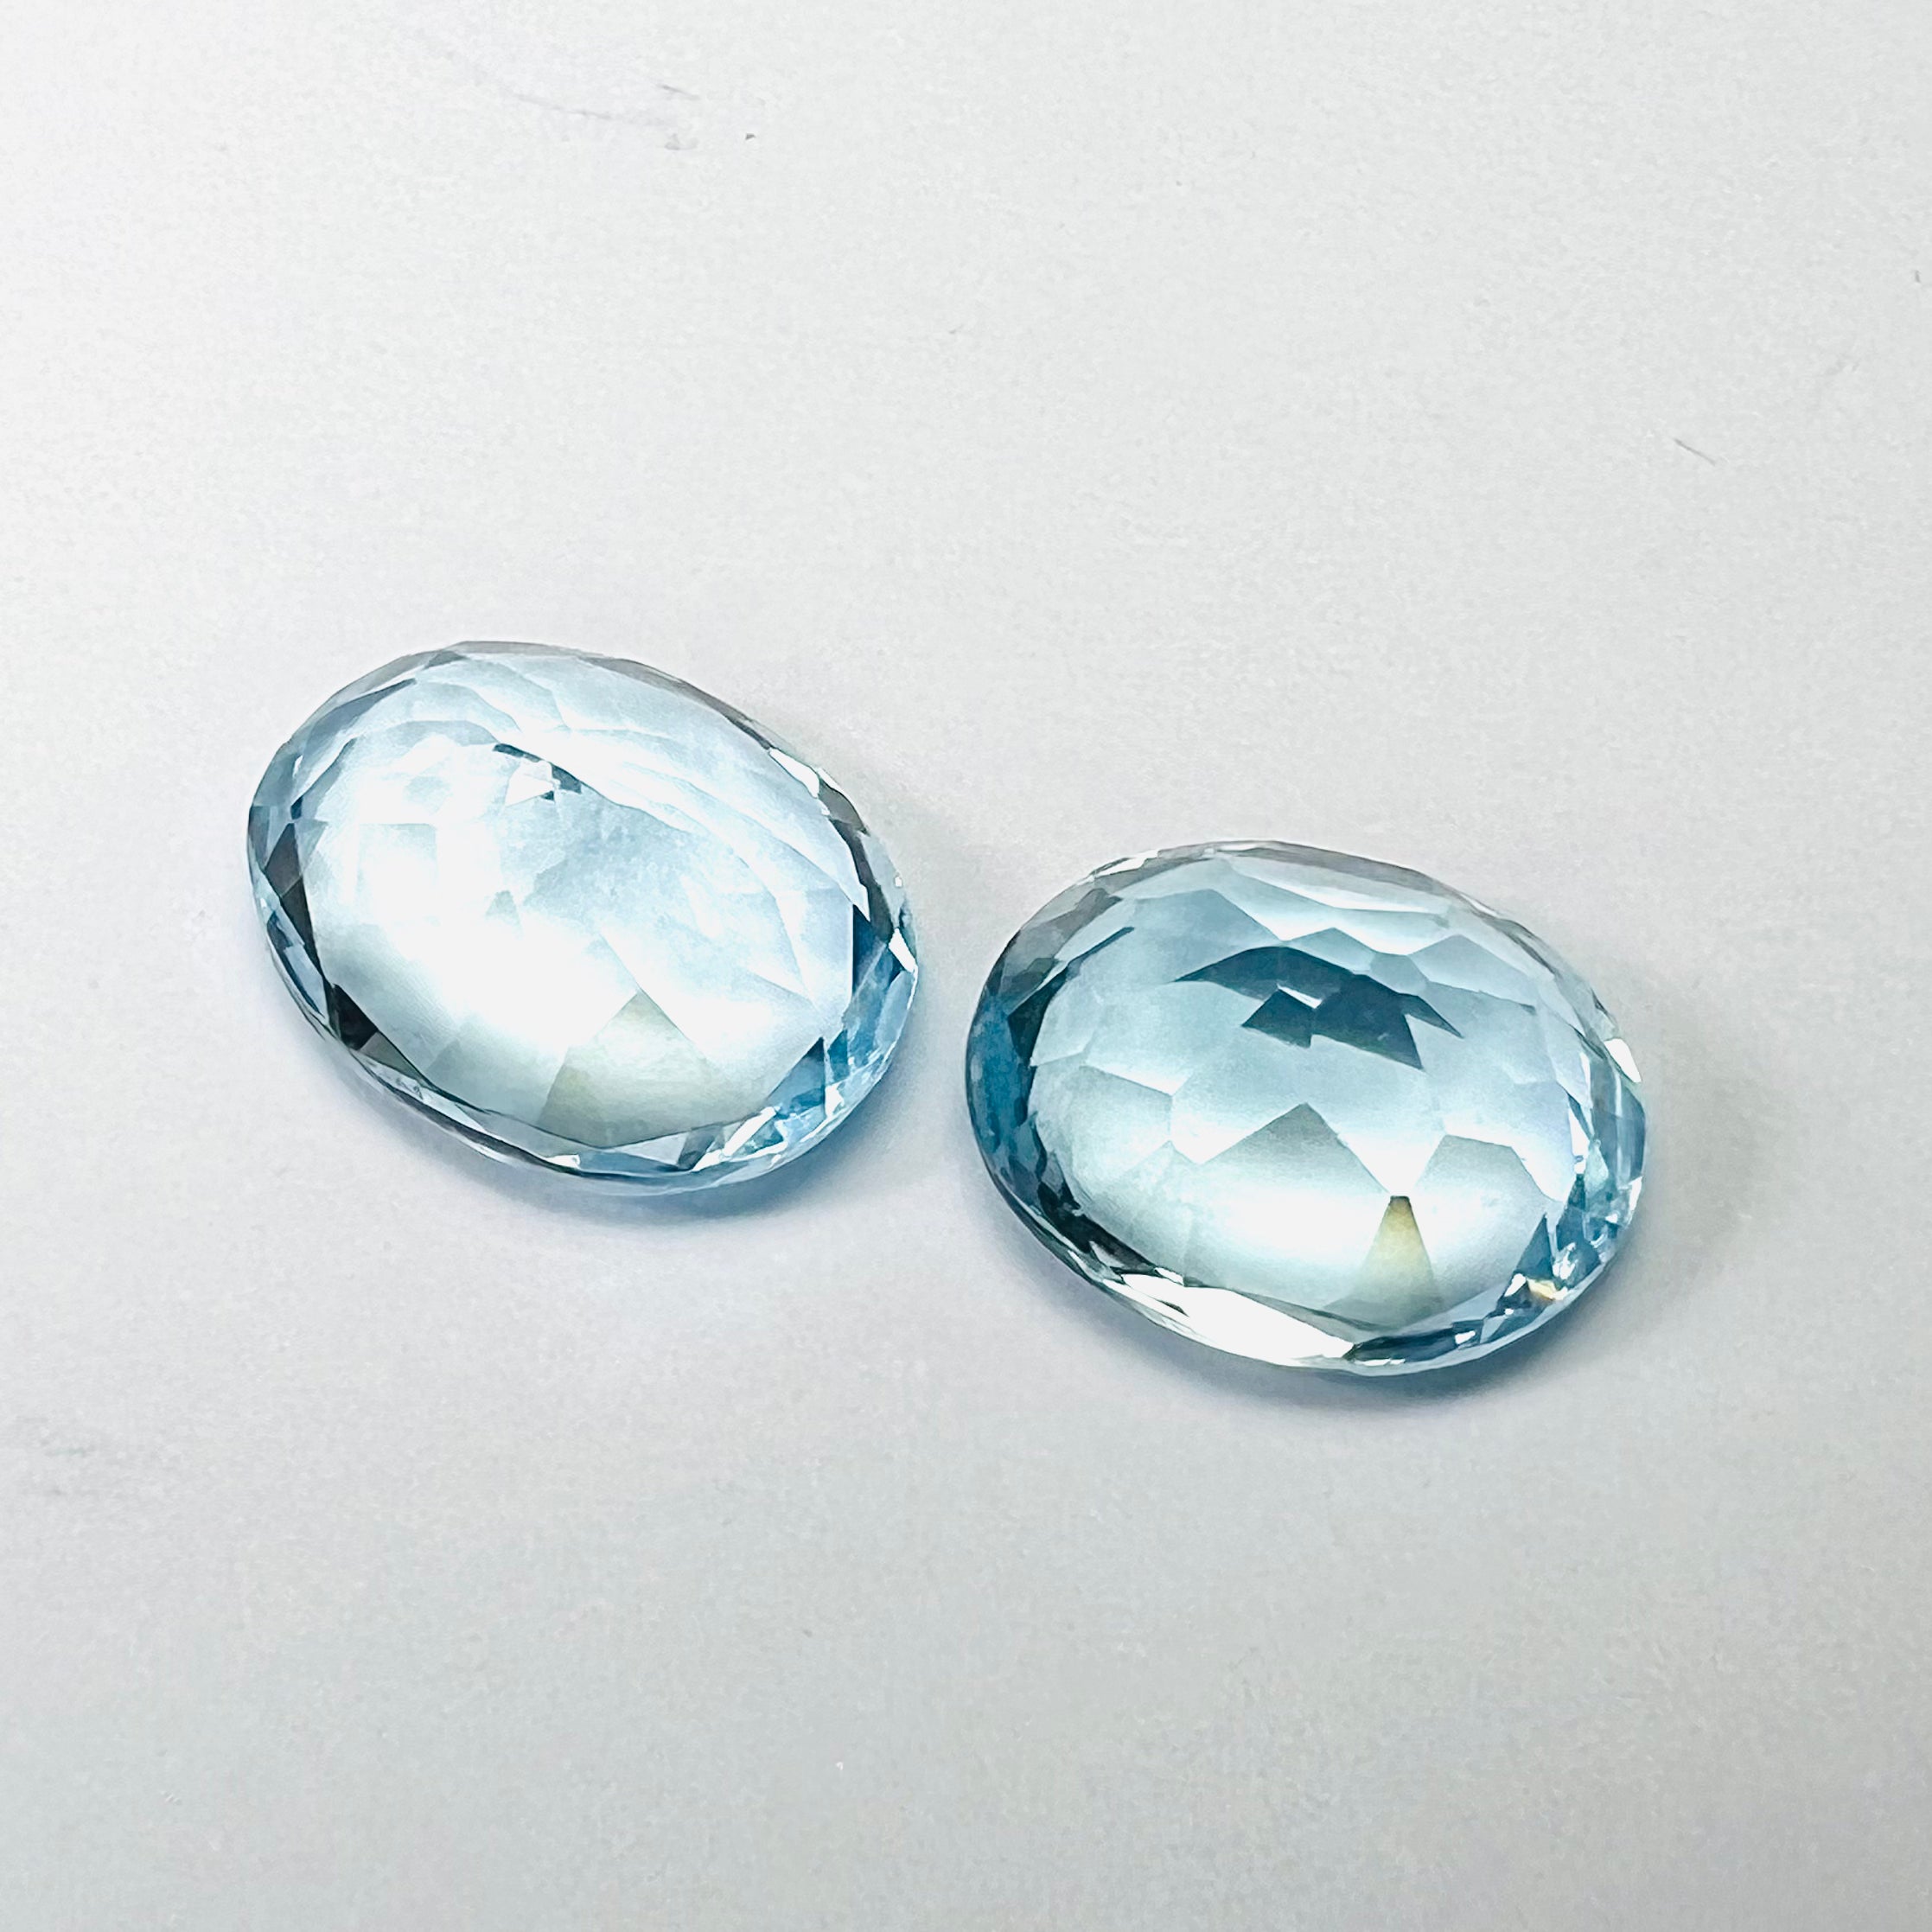 9.97CTW Pair of Loose Natural Oval Cut Topaz 10.95x9.15x6.3mm Earth mined Gemsto